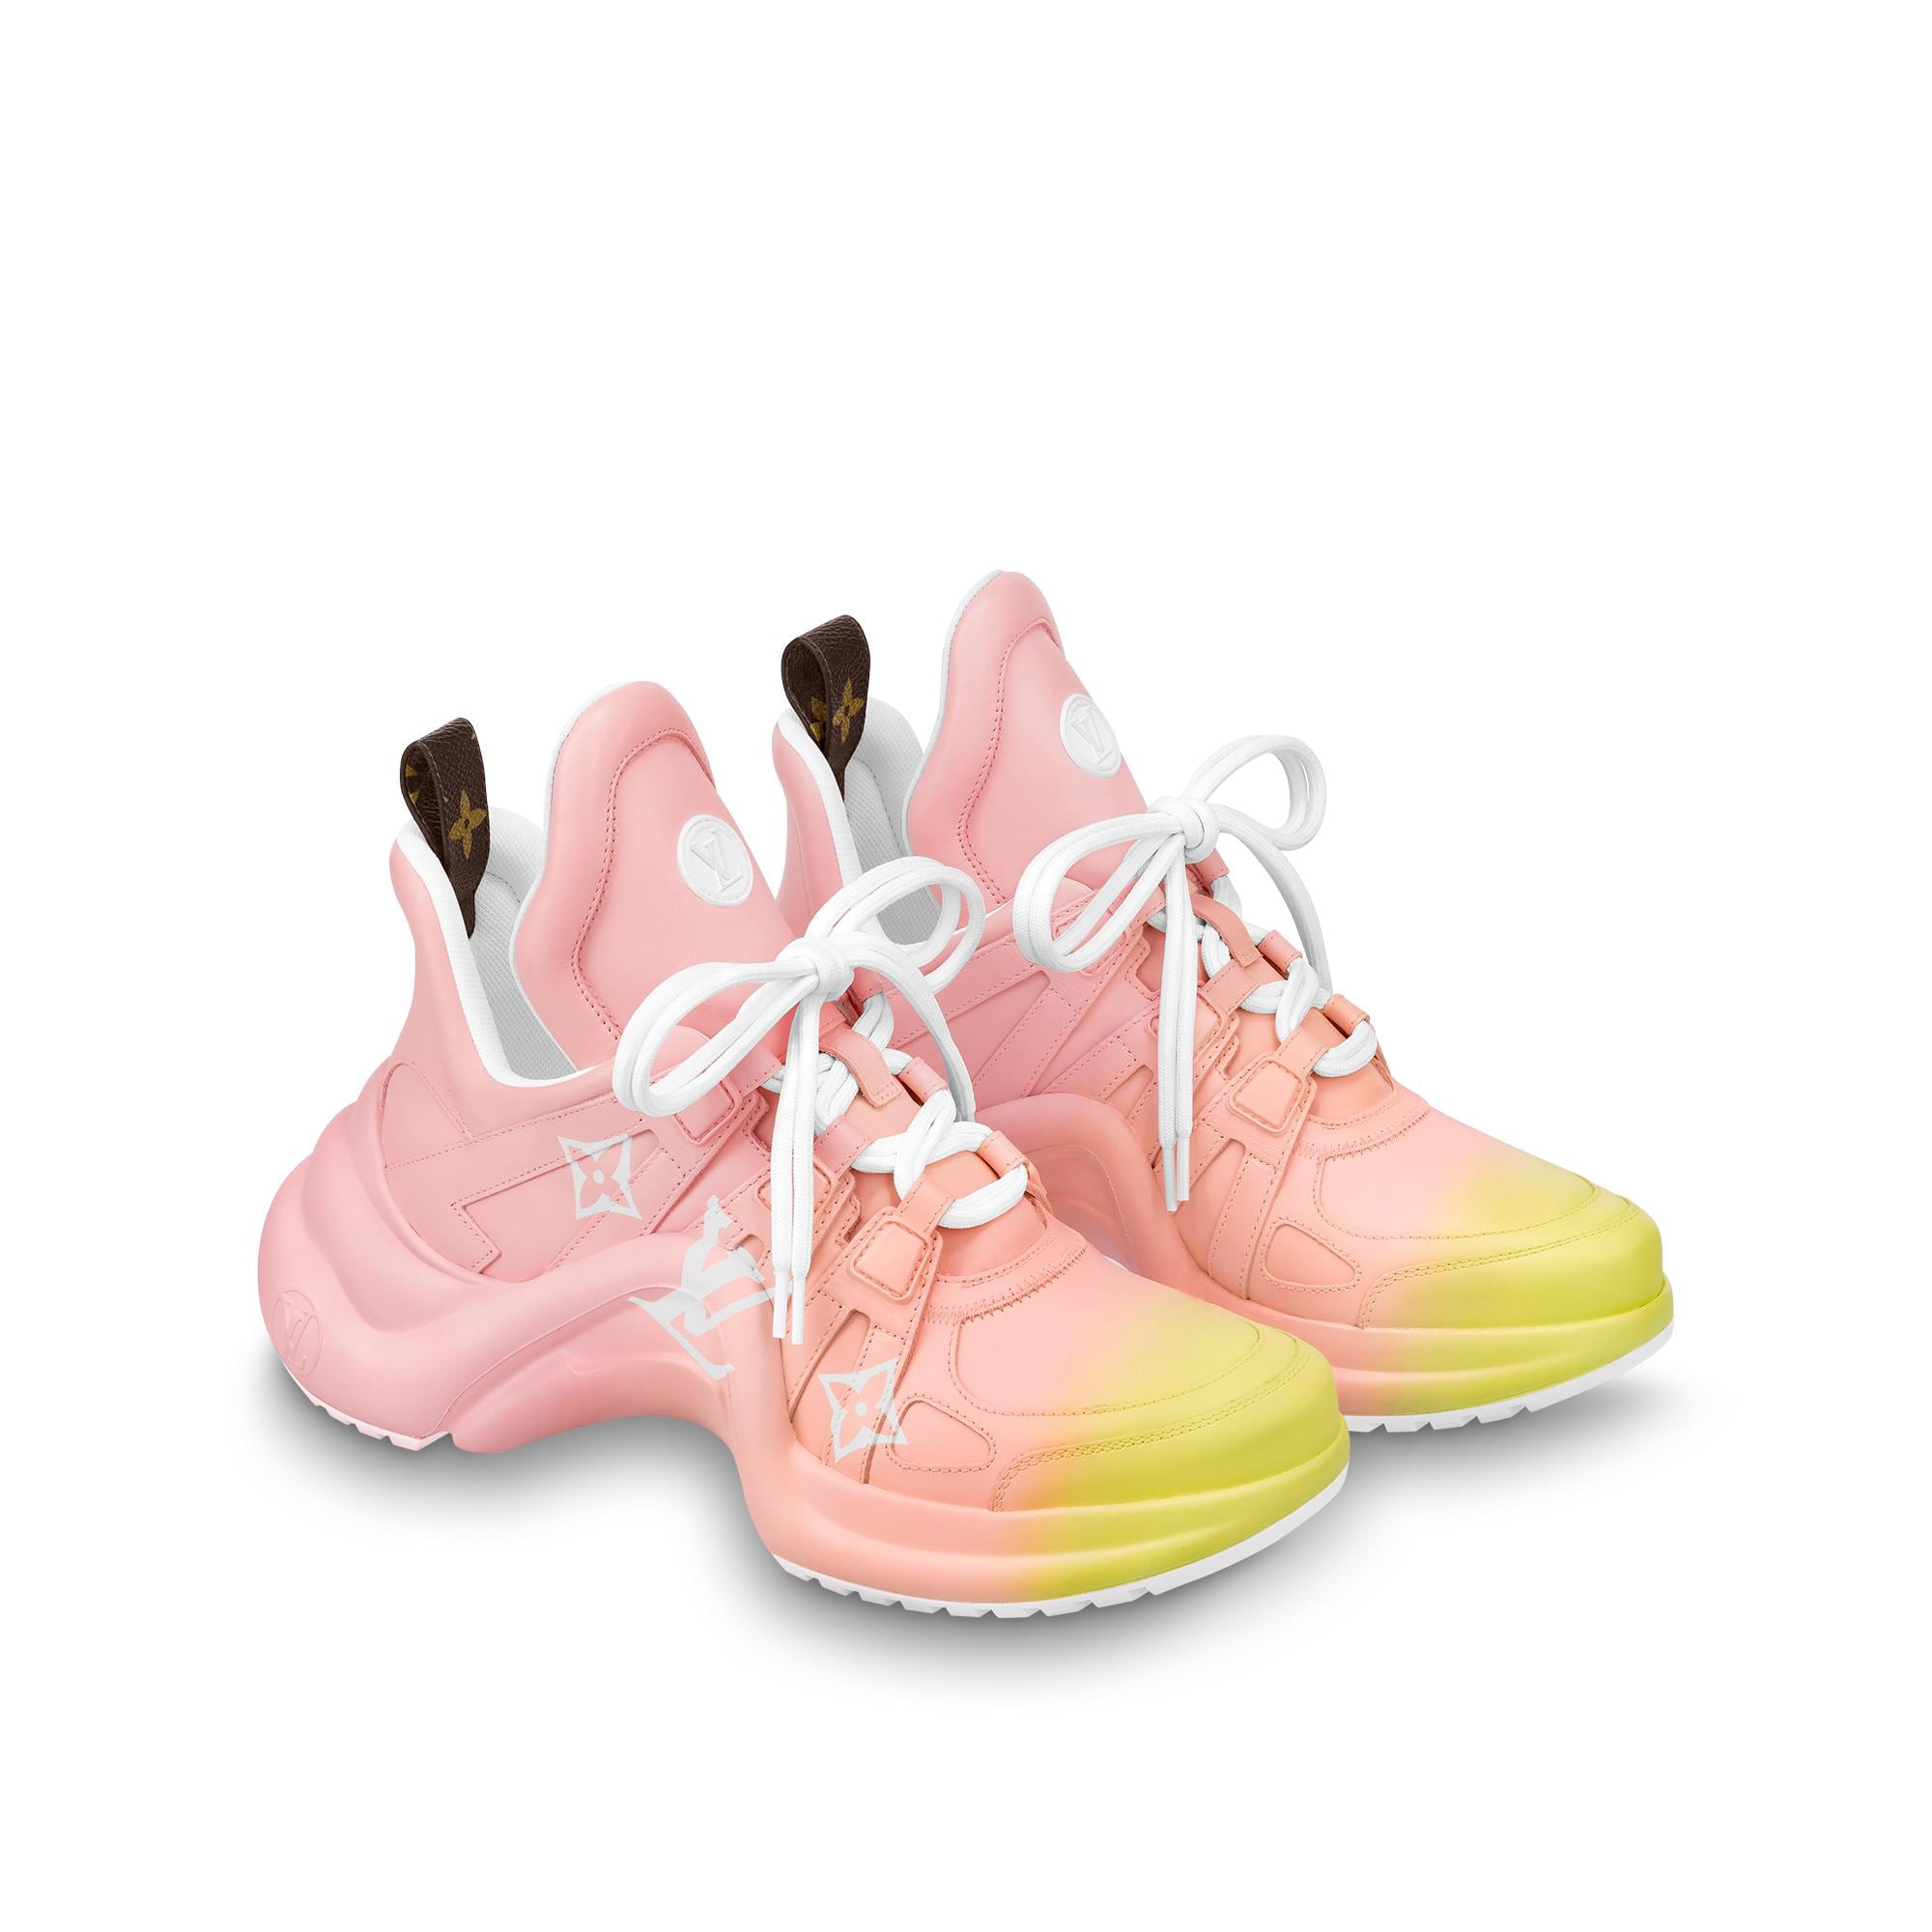 Louis Vuitton LV Archlight Sneaker in Rose - Shoes 1A8SYA - $174.20 